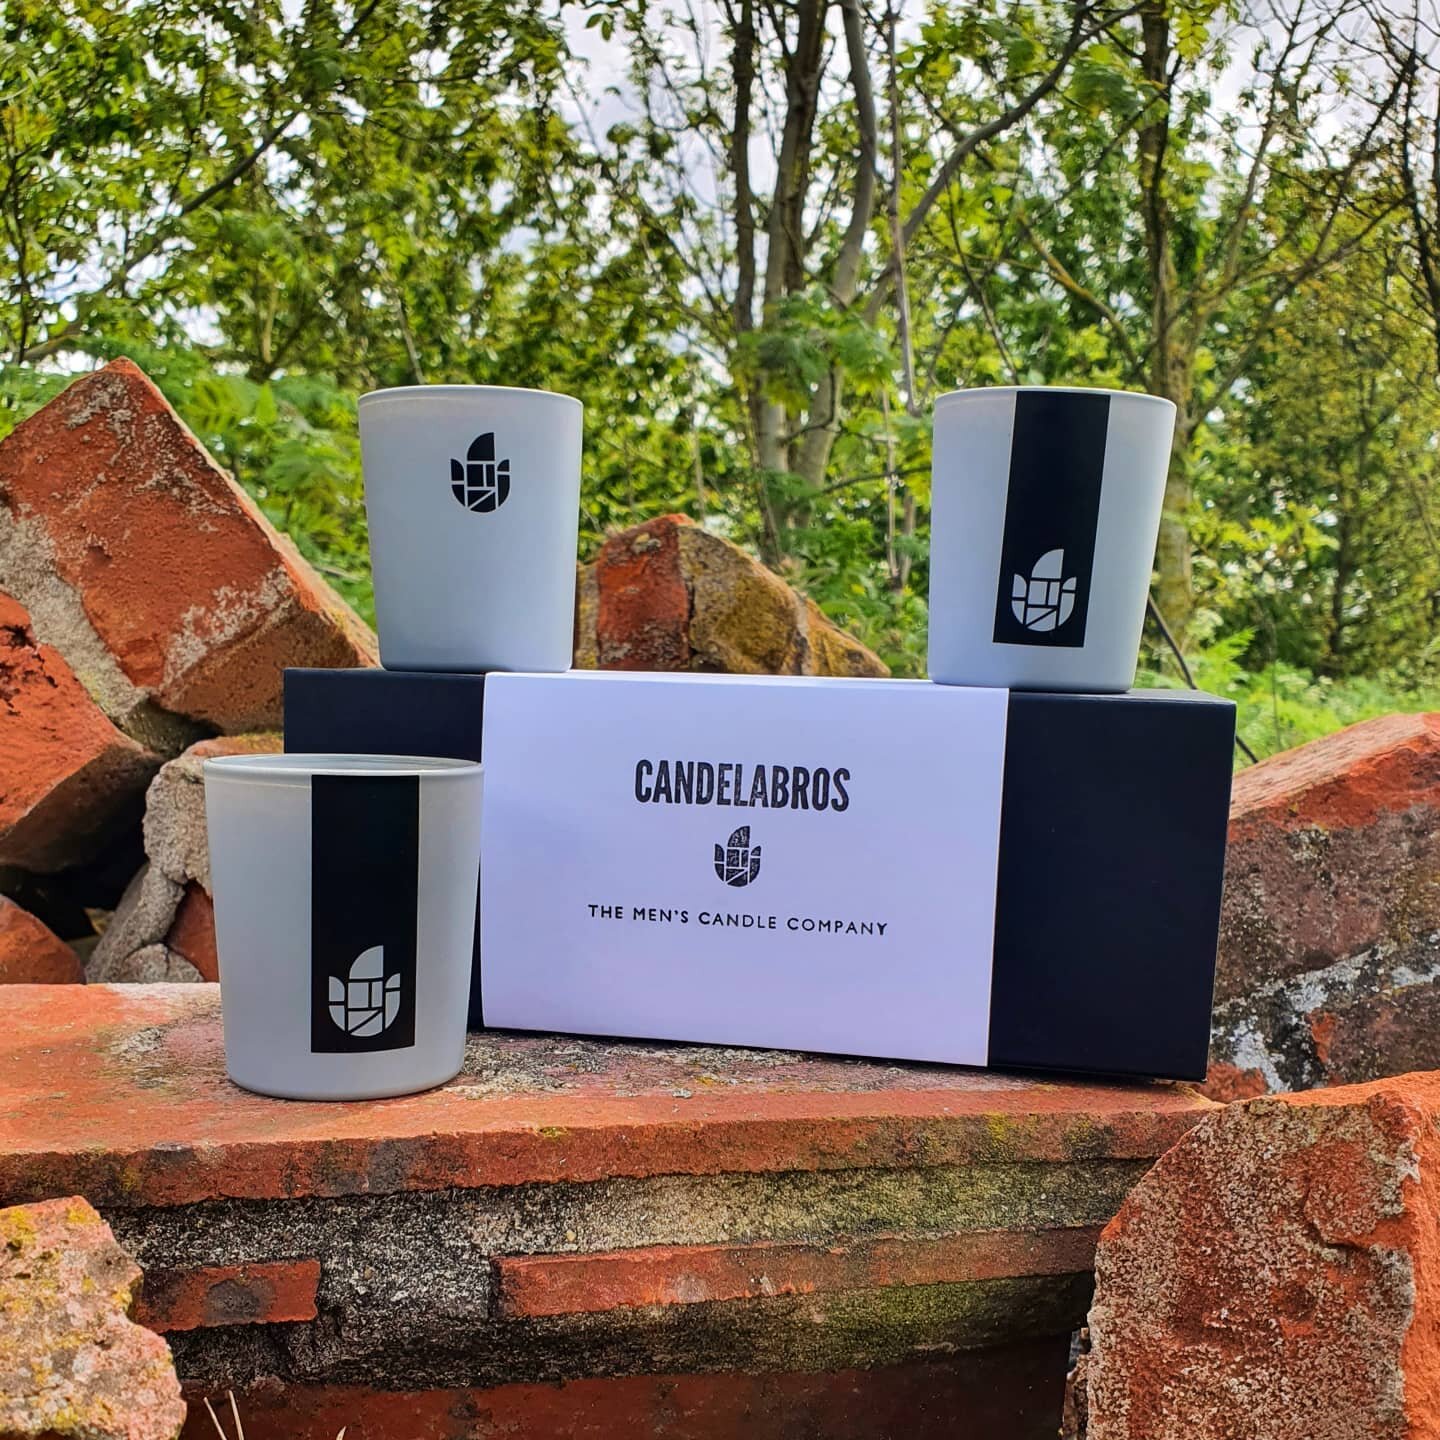 Happy Father's Day 🔥

It's your day, so we hope you're spending it your way!

#menscandles #candlesformen #mancave #scentedcandles #soycandle #homedecor #artisancandle #giftforhim #candleinspo #candleculture #candlesofinstagram #candlelover #mandles